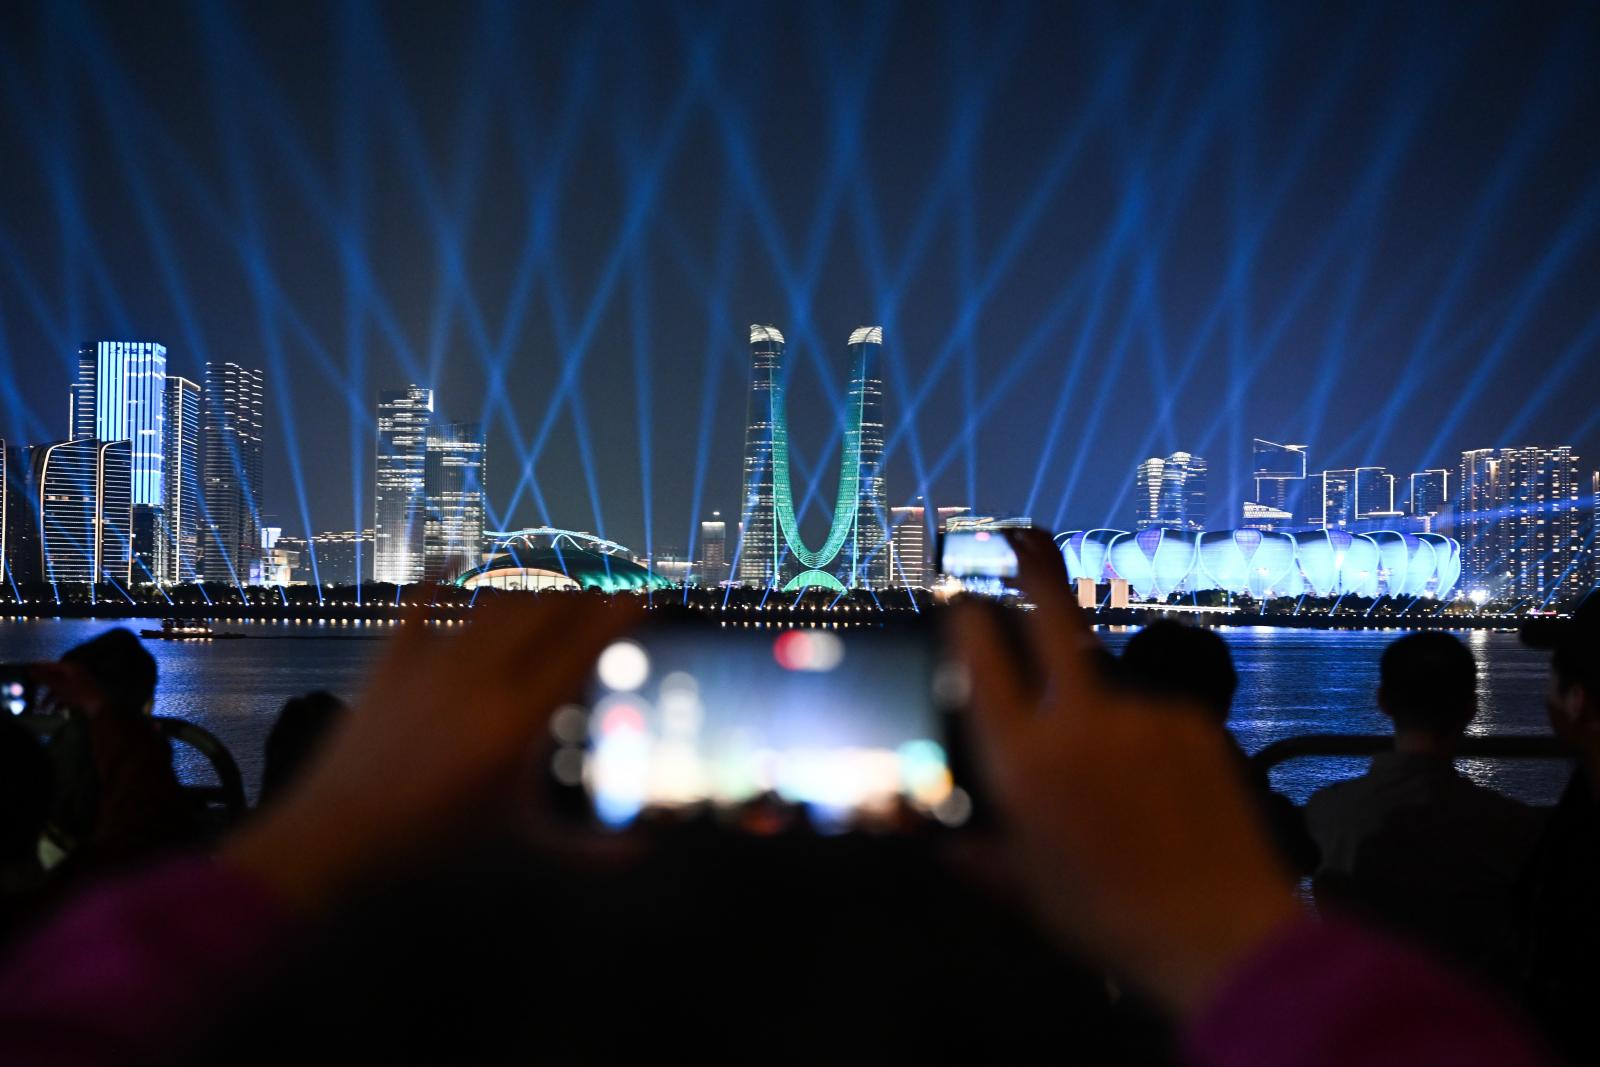 Zhejiang Jinhua Lake Seawall Park light show lights up for the first time